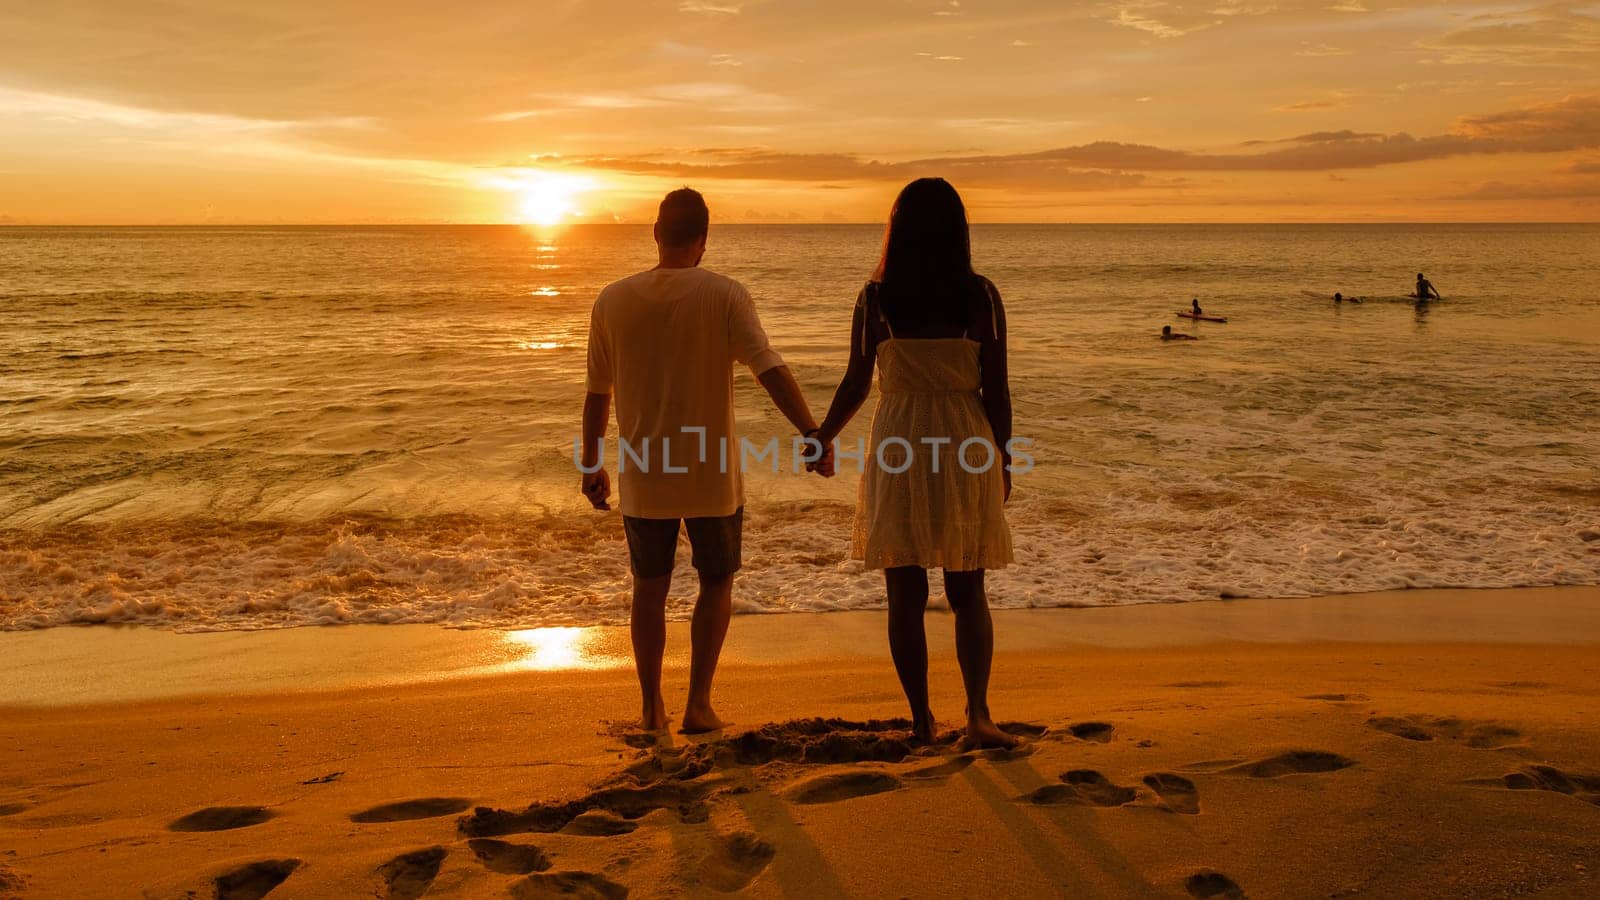 A couple of men and woman watching sunset at Naithon Beach Phuket Thailand, a famous surf spot in Phuket, Naithon beach at sunset.